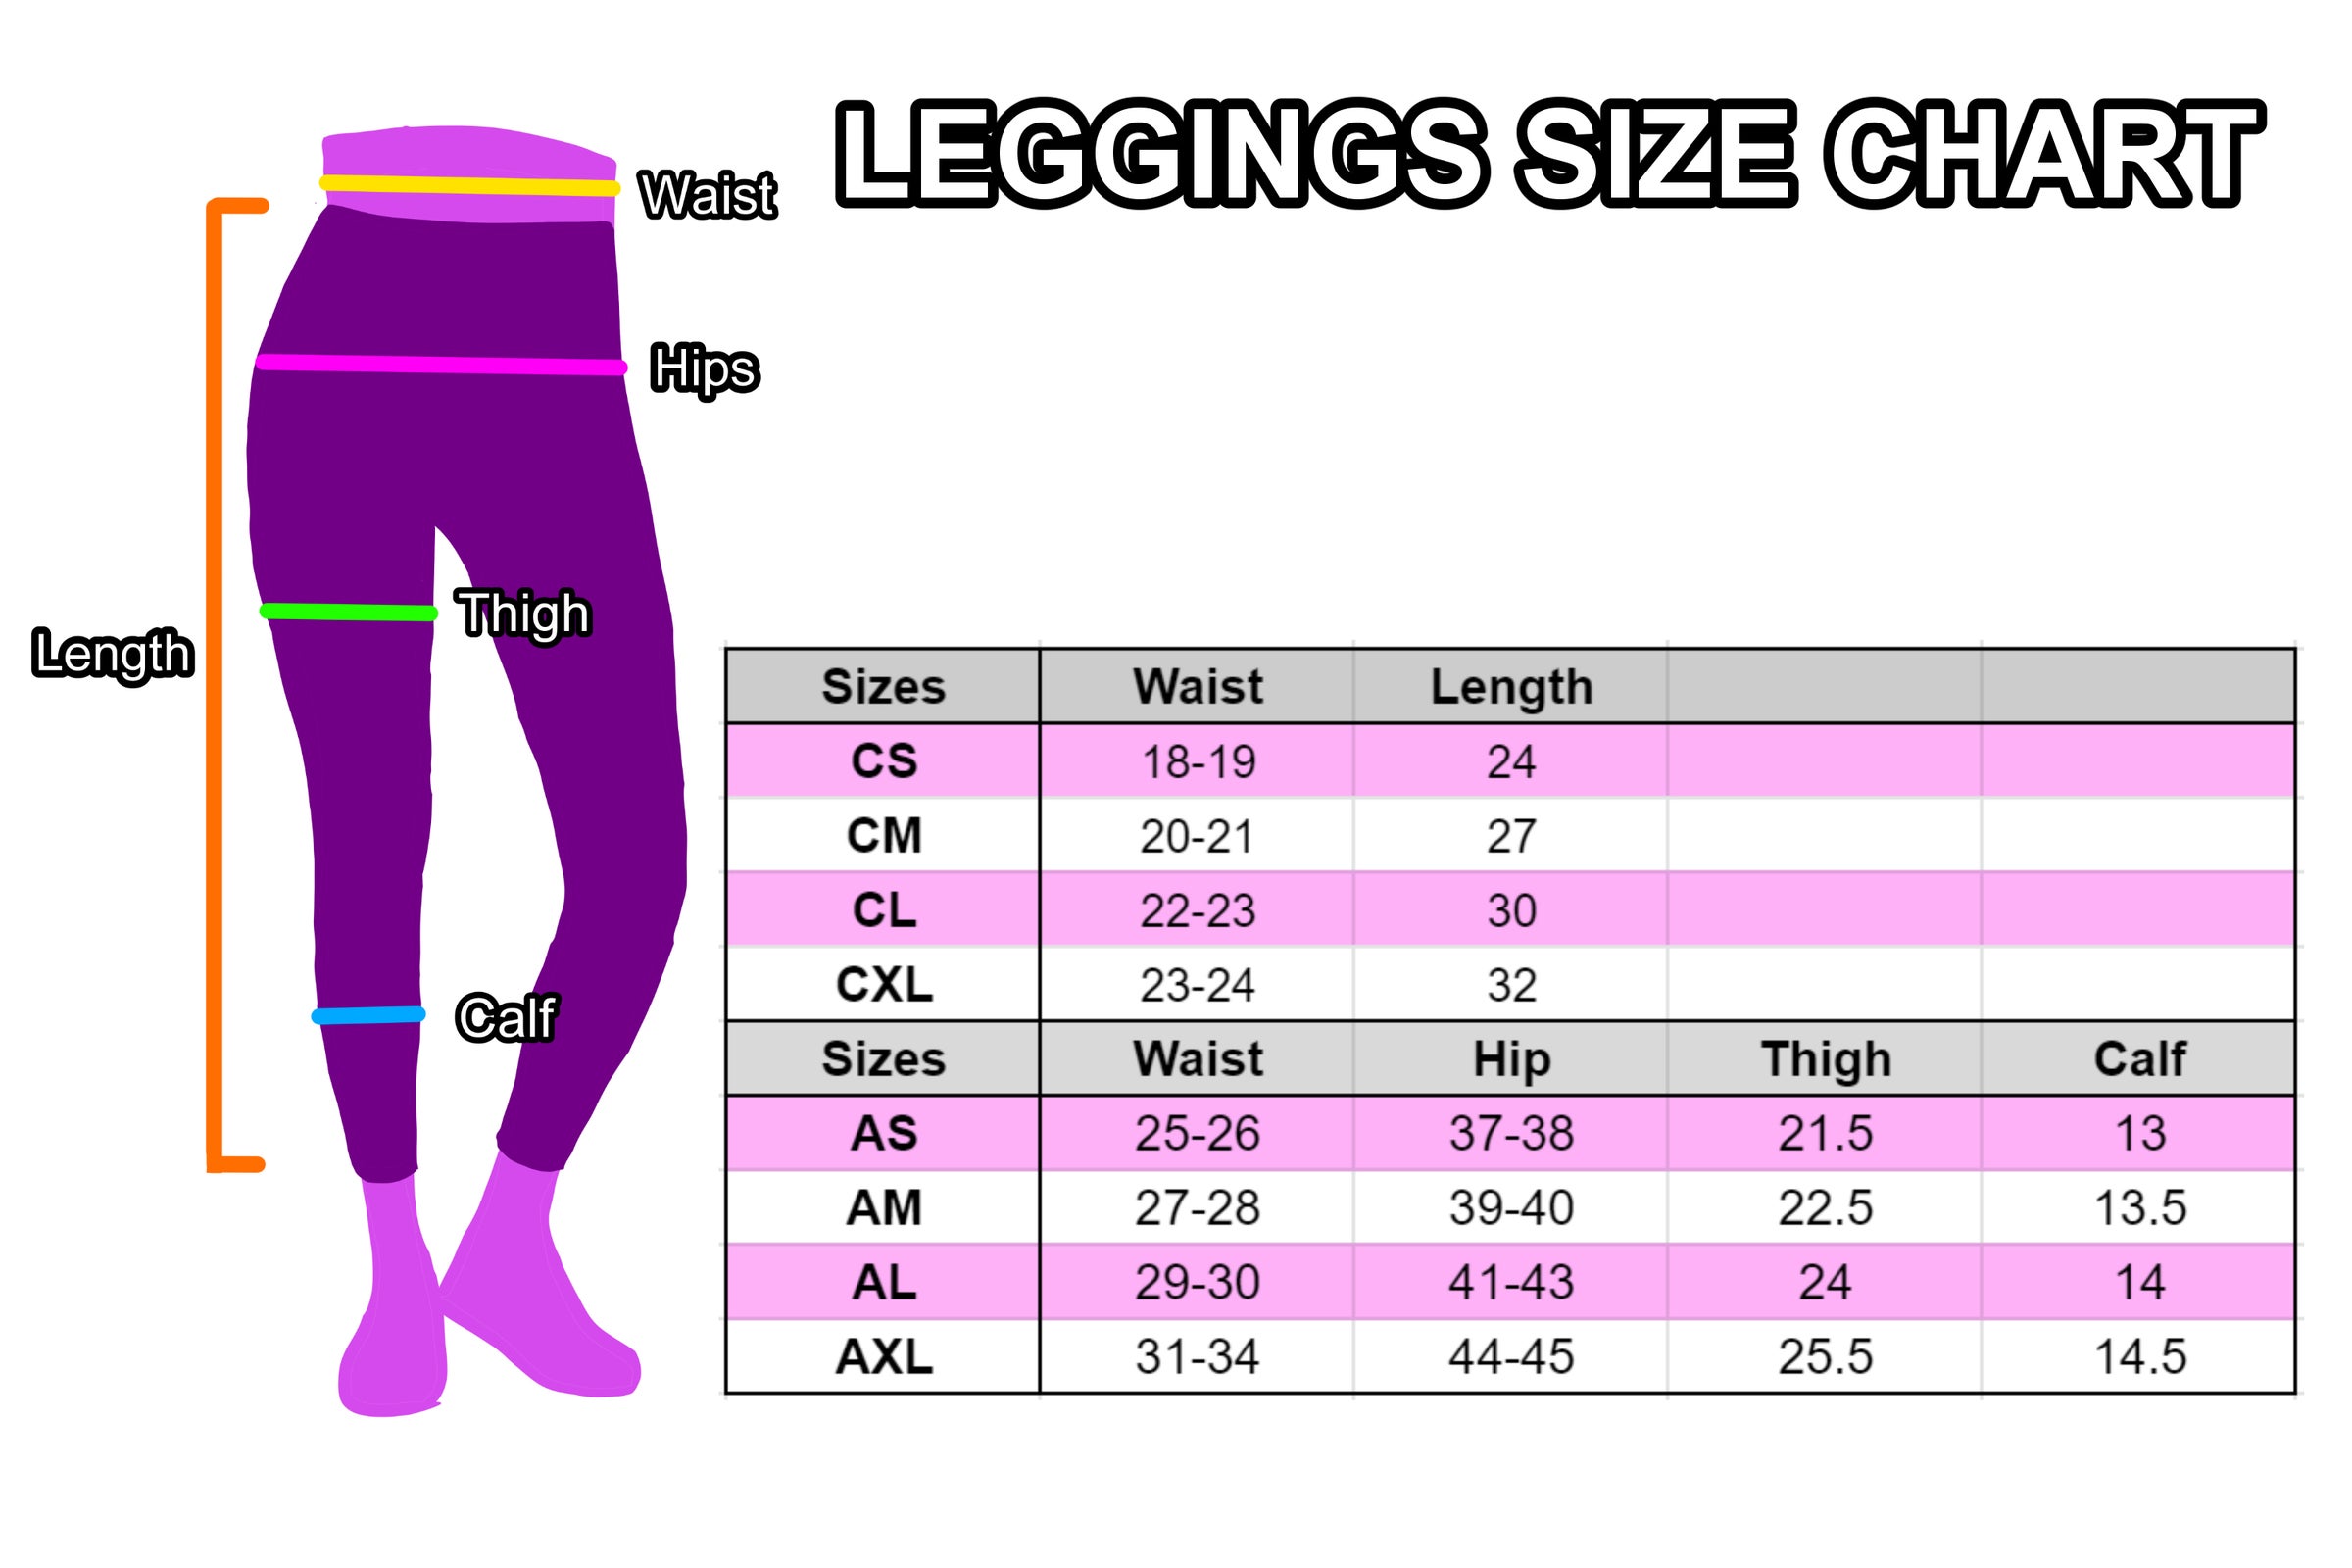 Look-it Size Charts